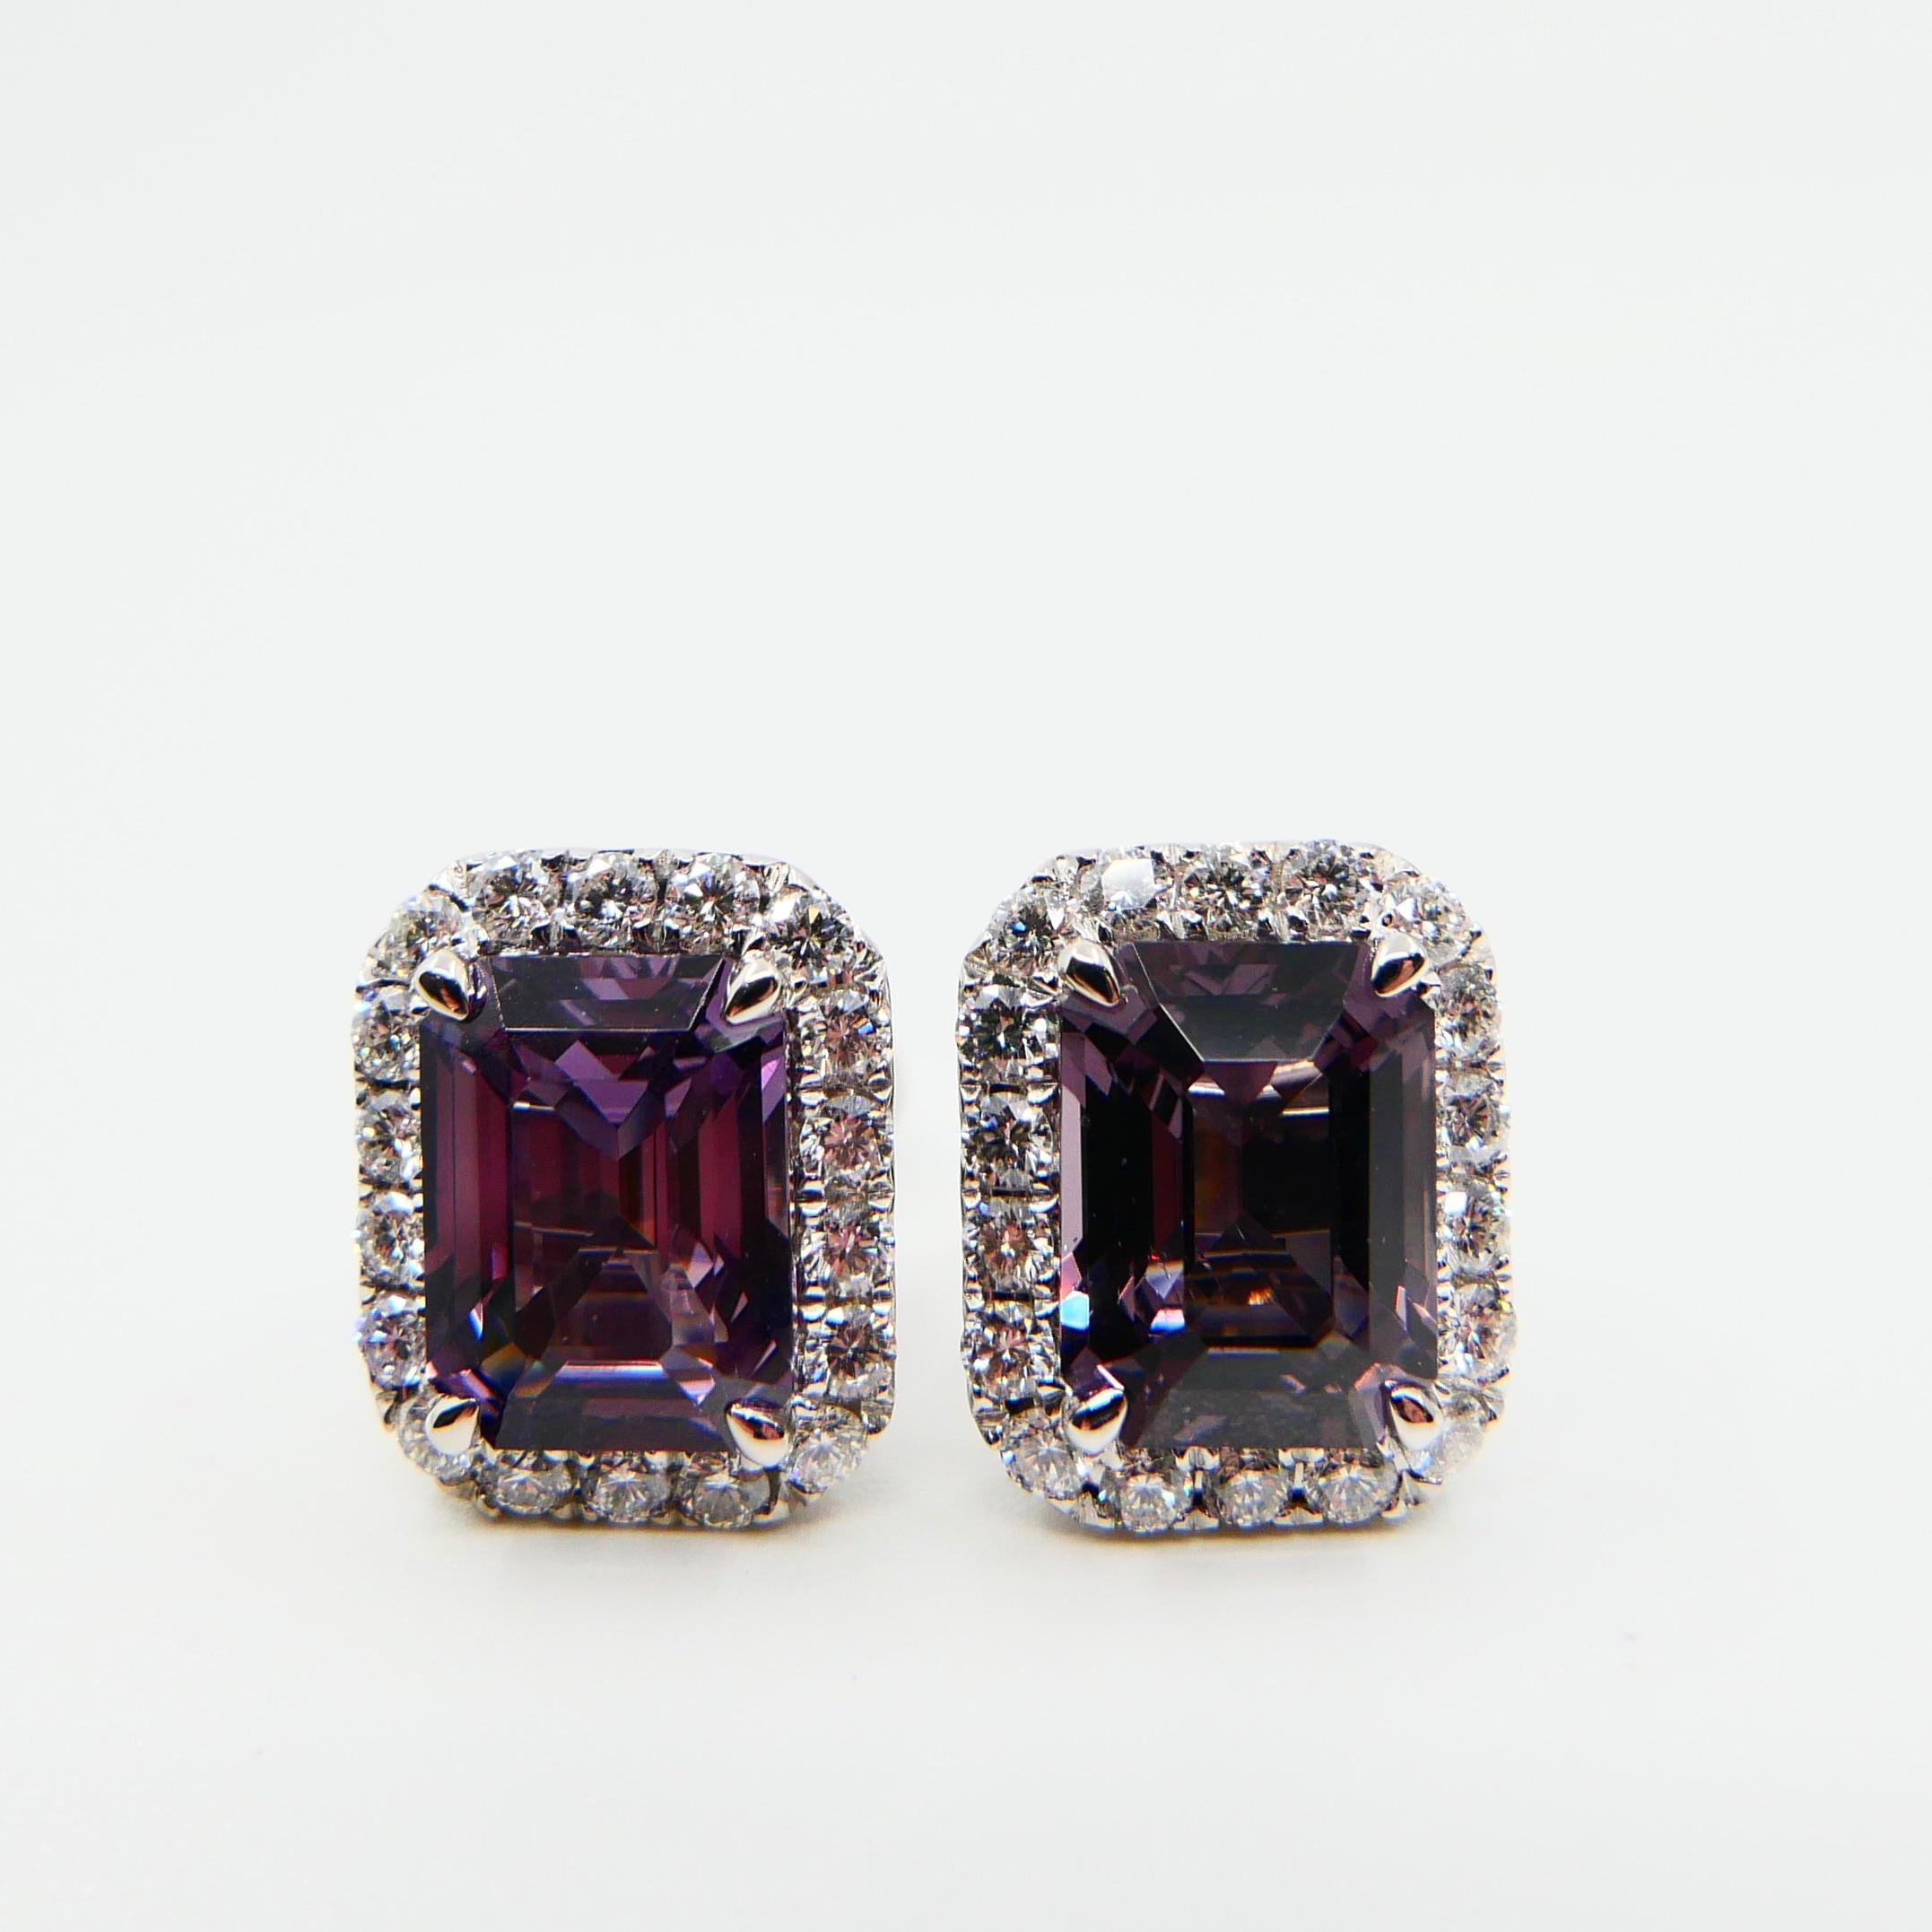 Natural 4.73 Carat Purple Step Cut Spinels and 0.67 Carat Diamond Earrings For Sale 2